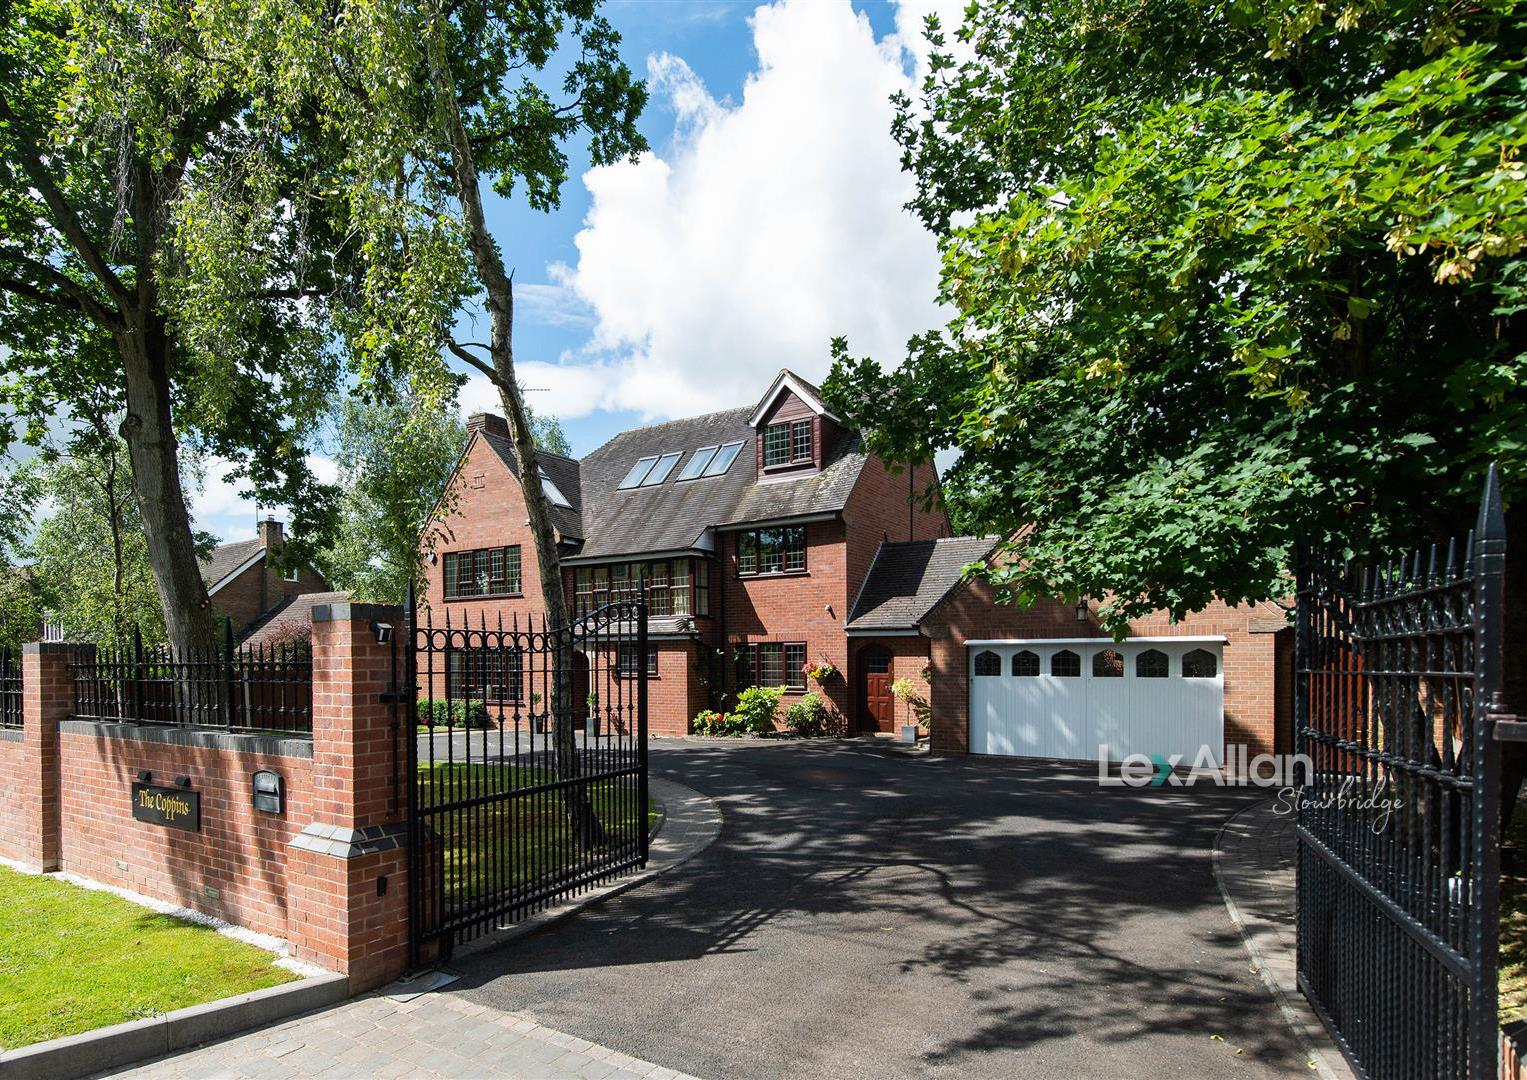 6 bed detached house for sale in Hunters Ride, Stourbridge - Property Image 1